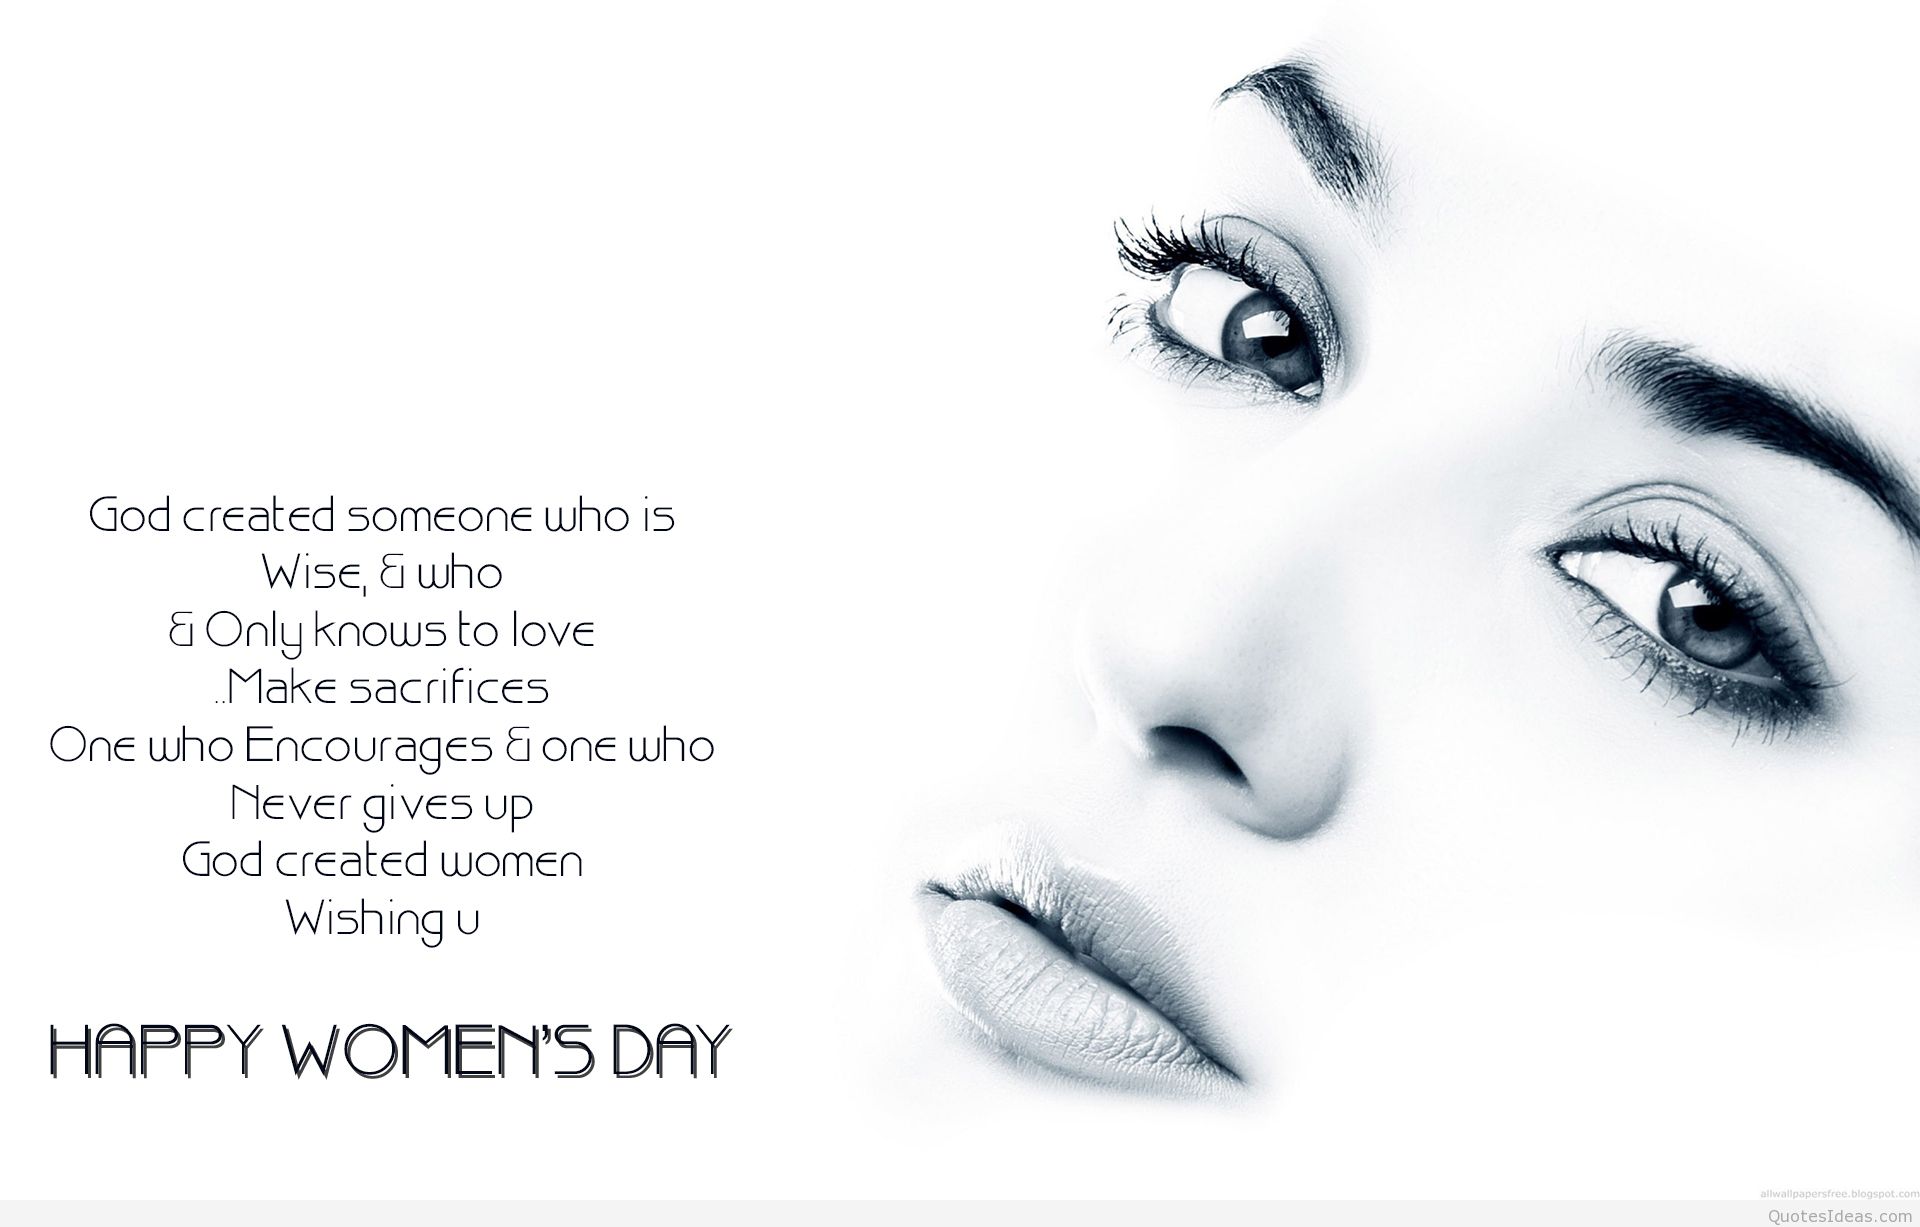 Women’s Day Quotes Fb Whatsapp Status Sms Happy Women’s Day Images Wishes Greetings Hd Wallpapers